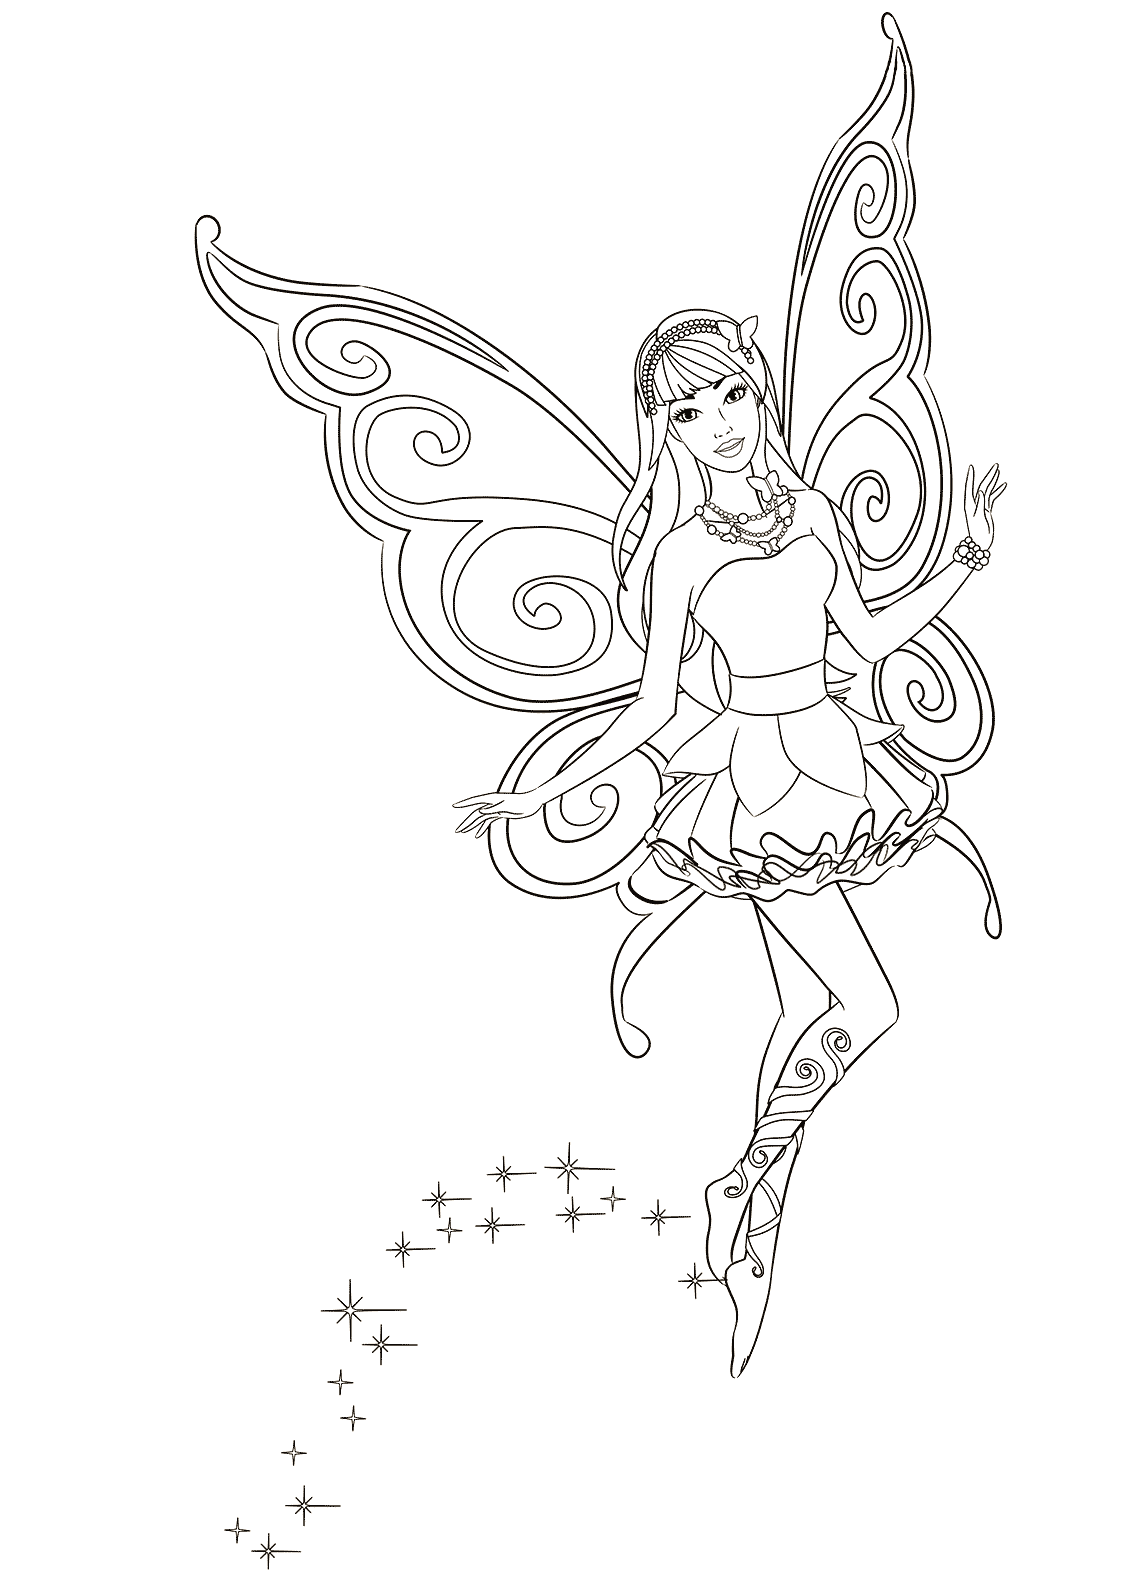 Coloring page - Fairy loves to fly